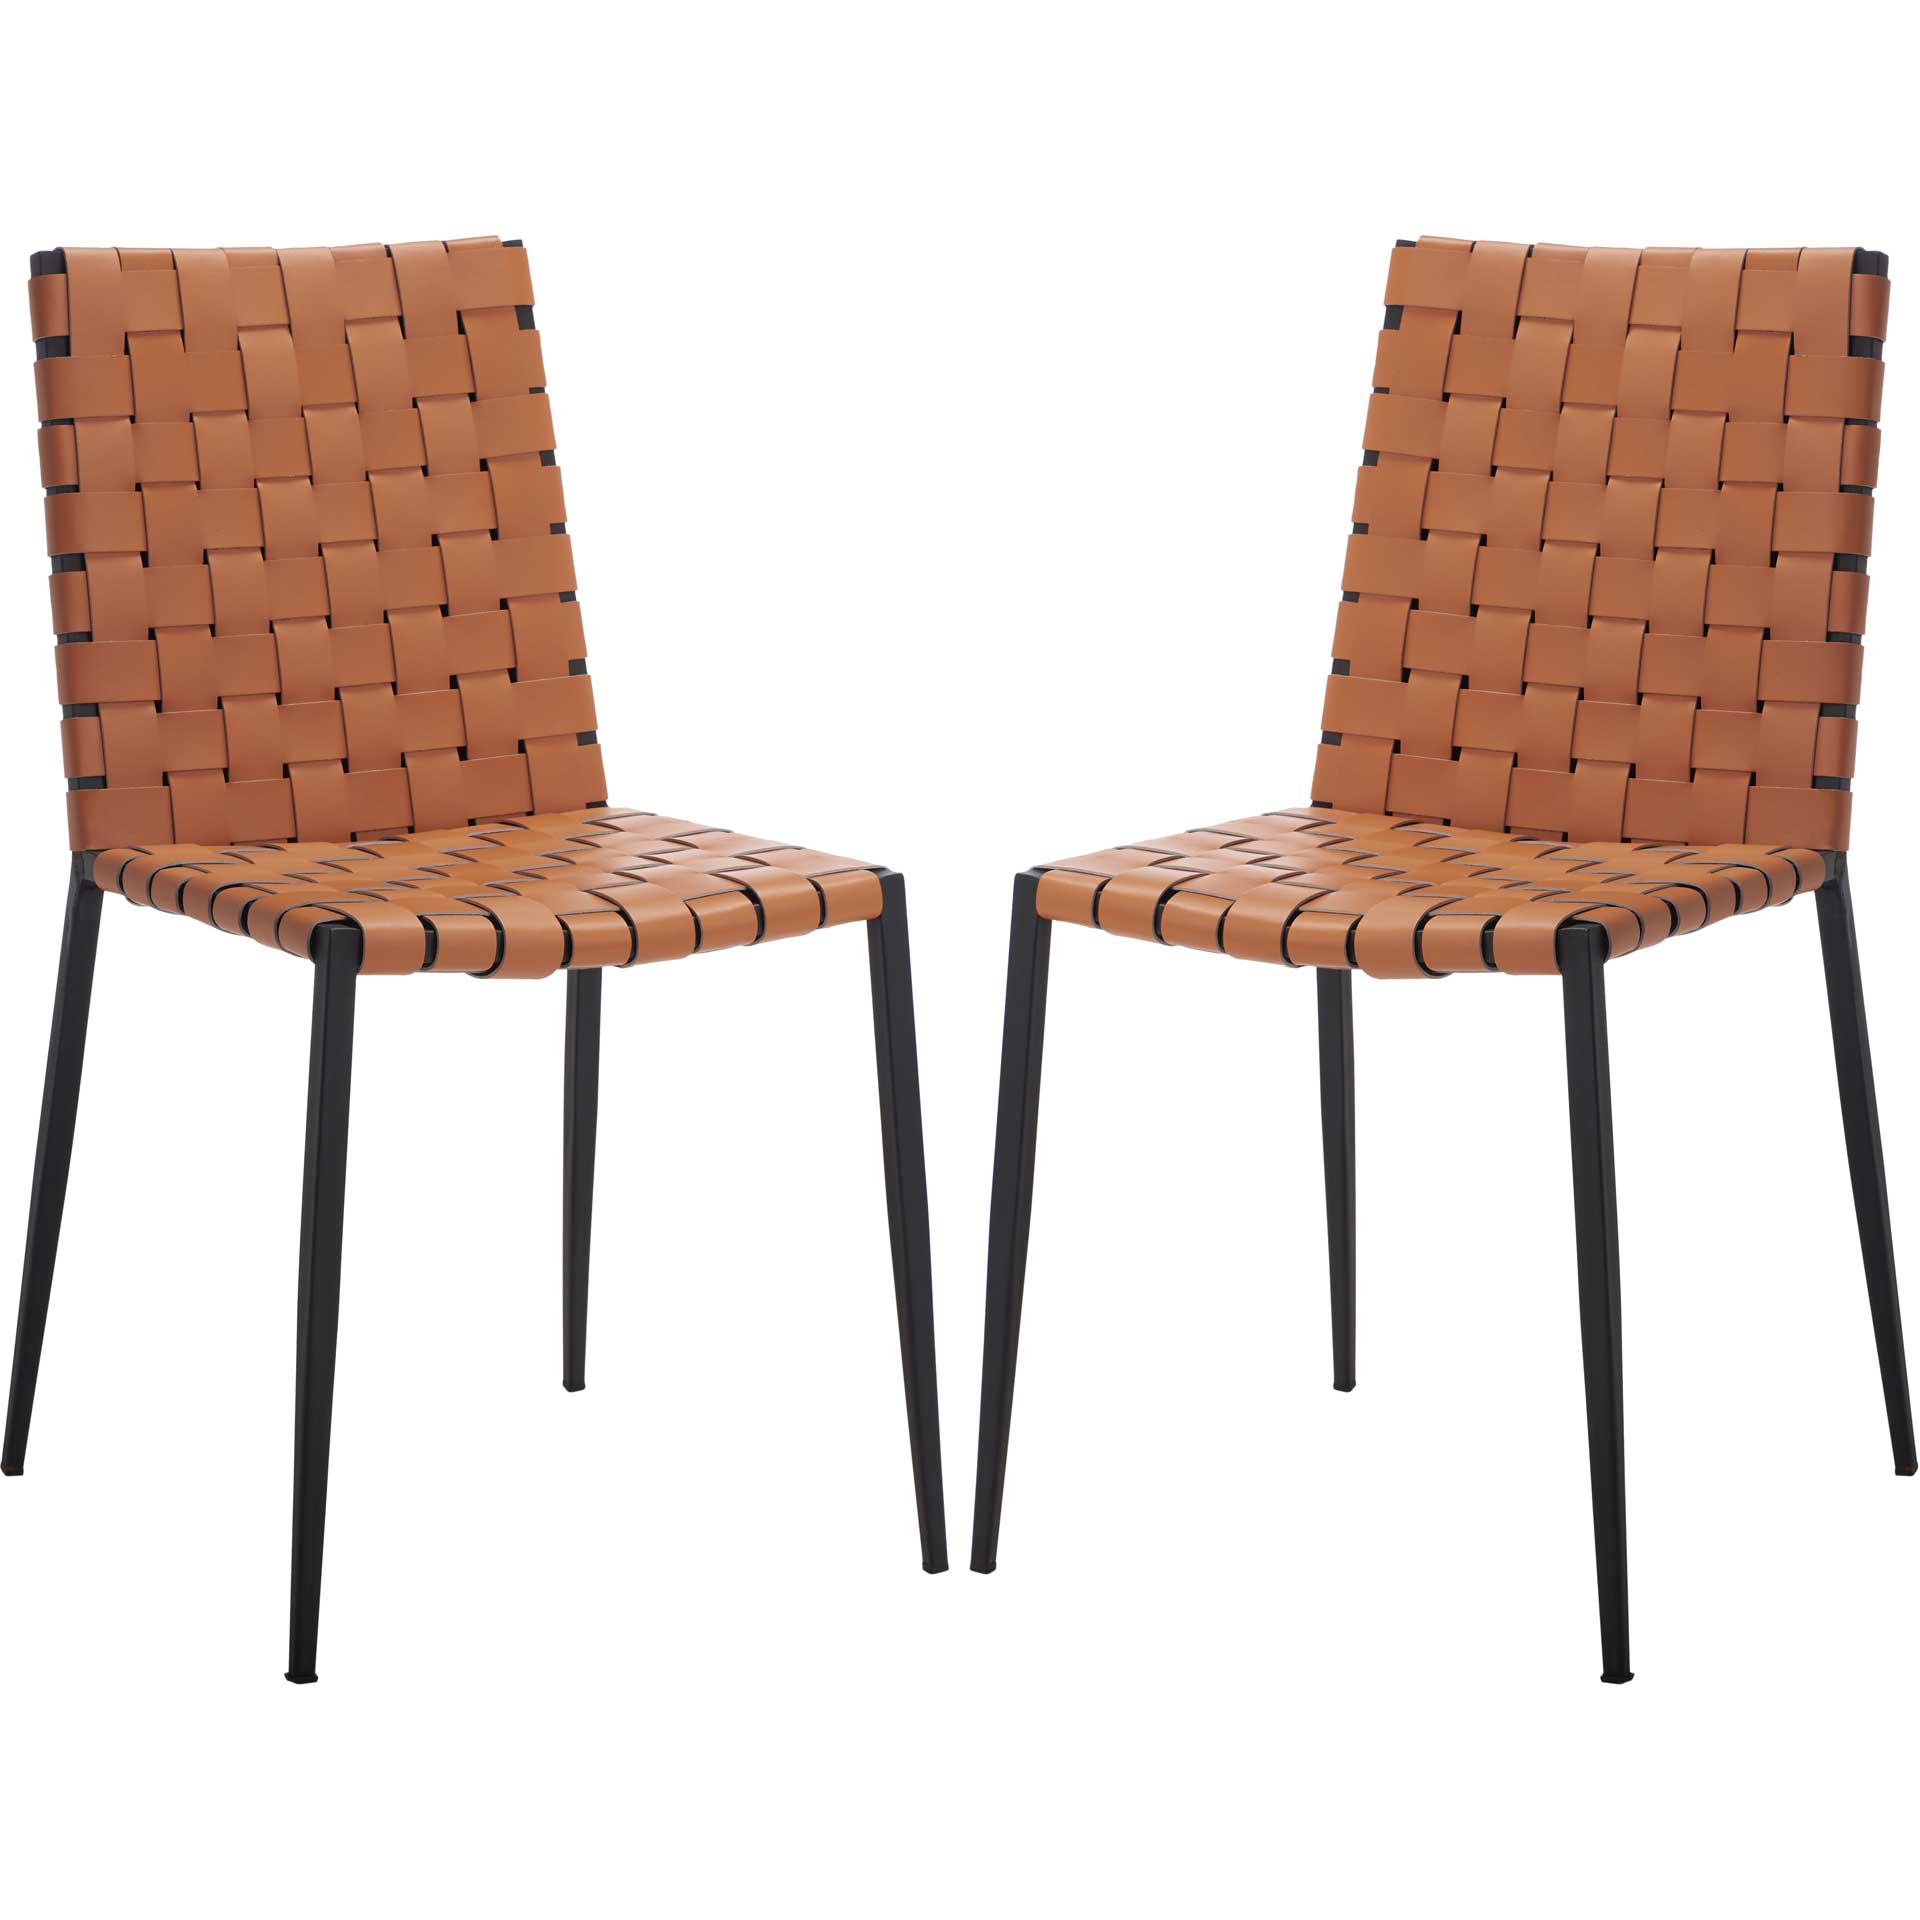 Ralen Woven Dining Chair Natural/Black (Set of 2)